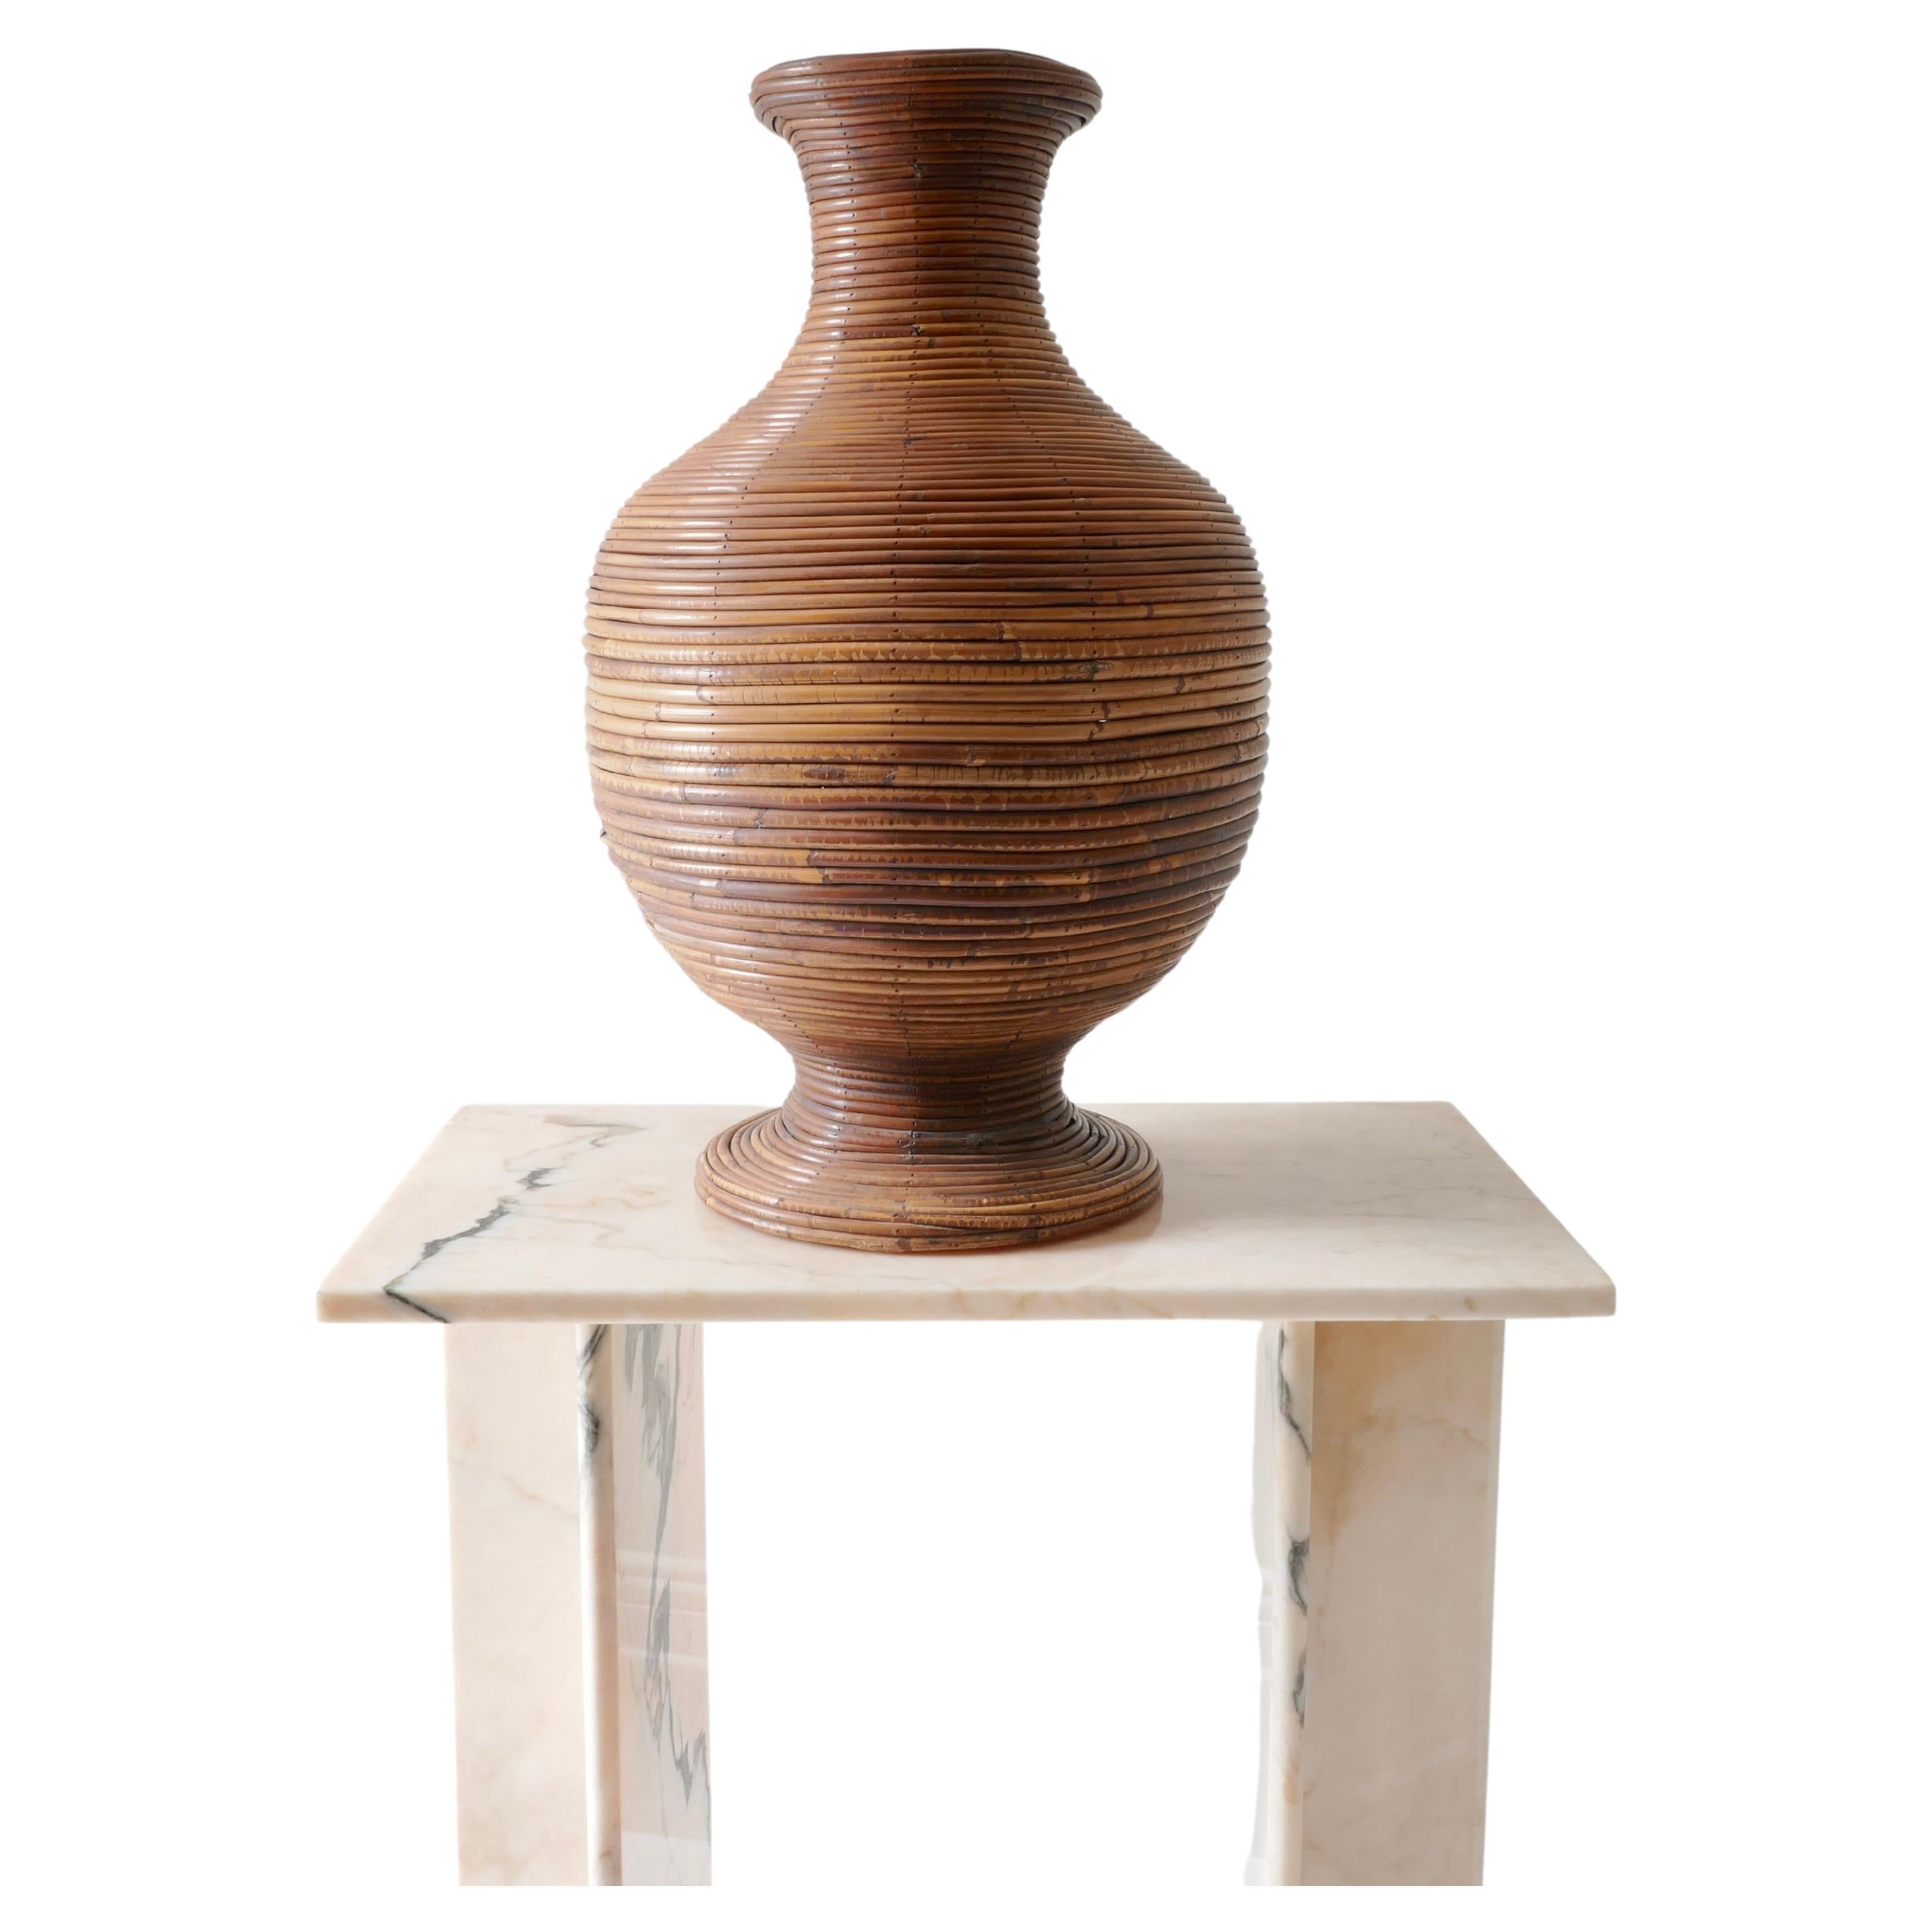 A substantial vase is perfect for holding dried arrangements or simply standing on its own. 
Large and impressive mid-century urn crafted in pencil reed in a classic round form with a lush warm finish. Timeless and eternally chic .

Base diameter